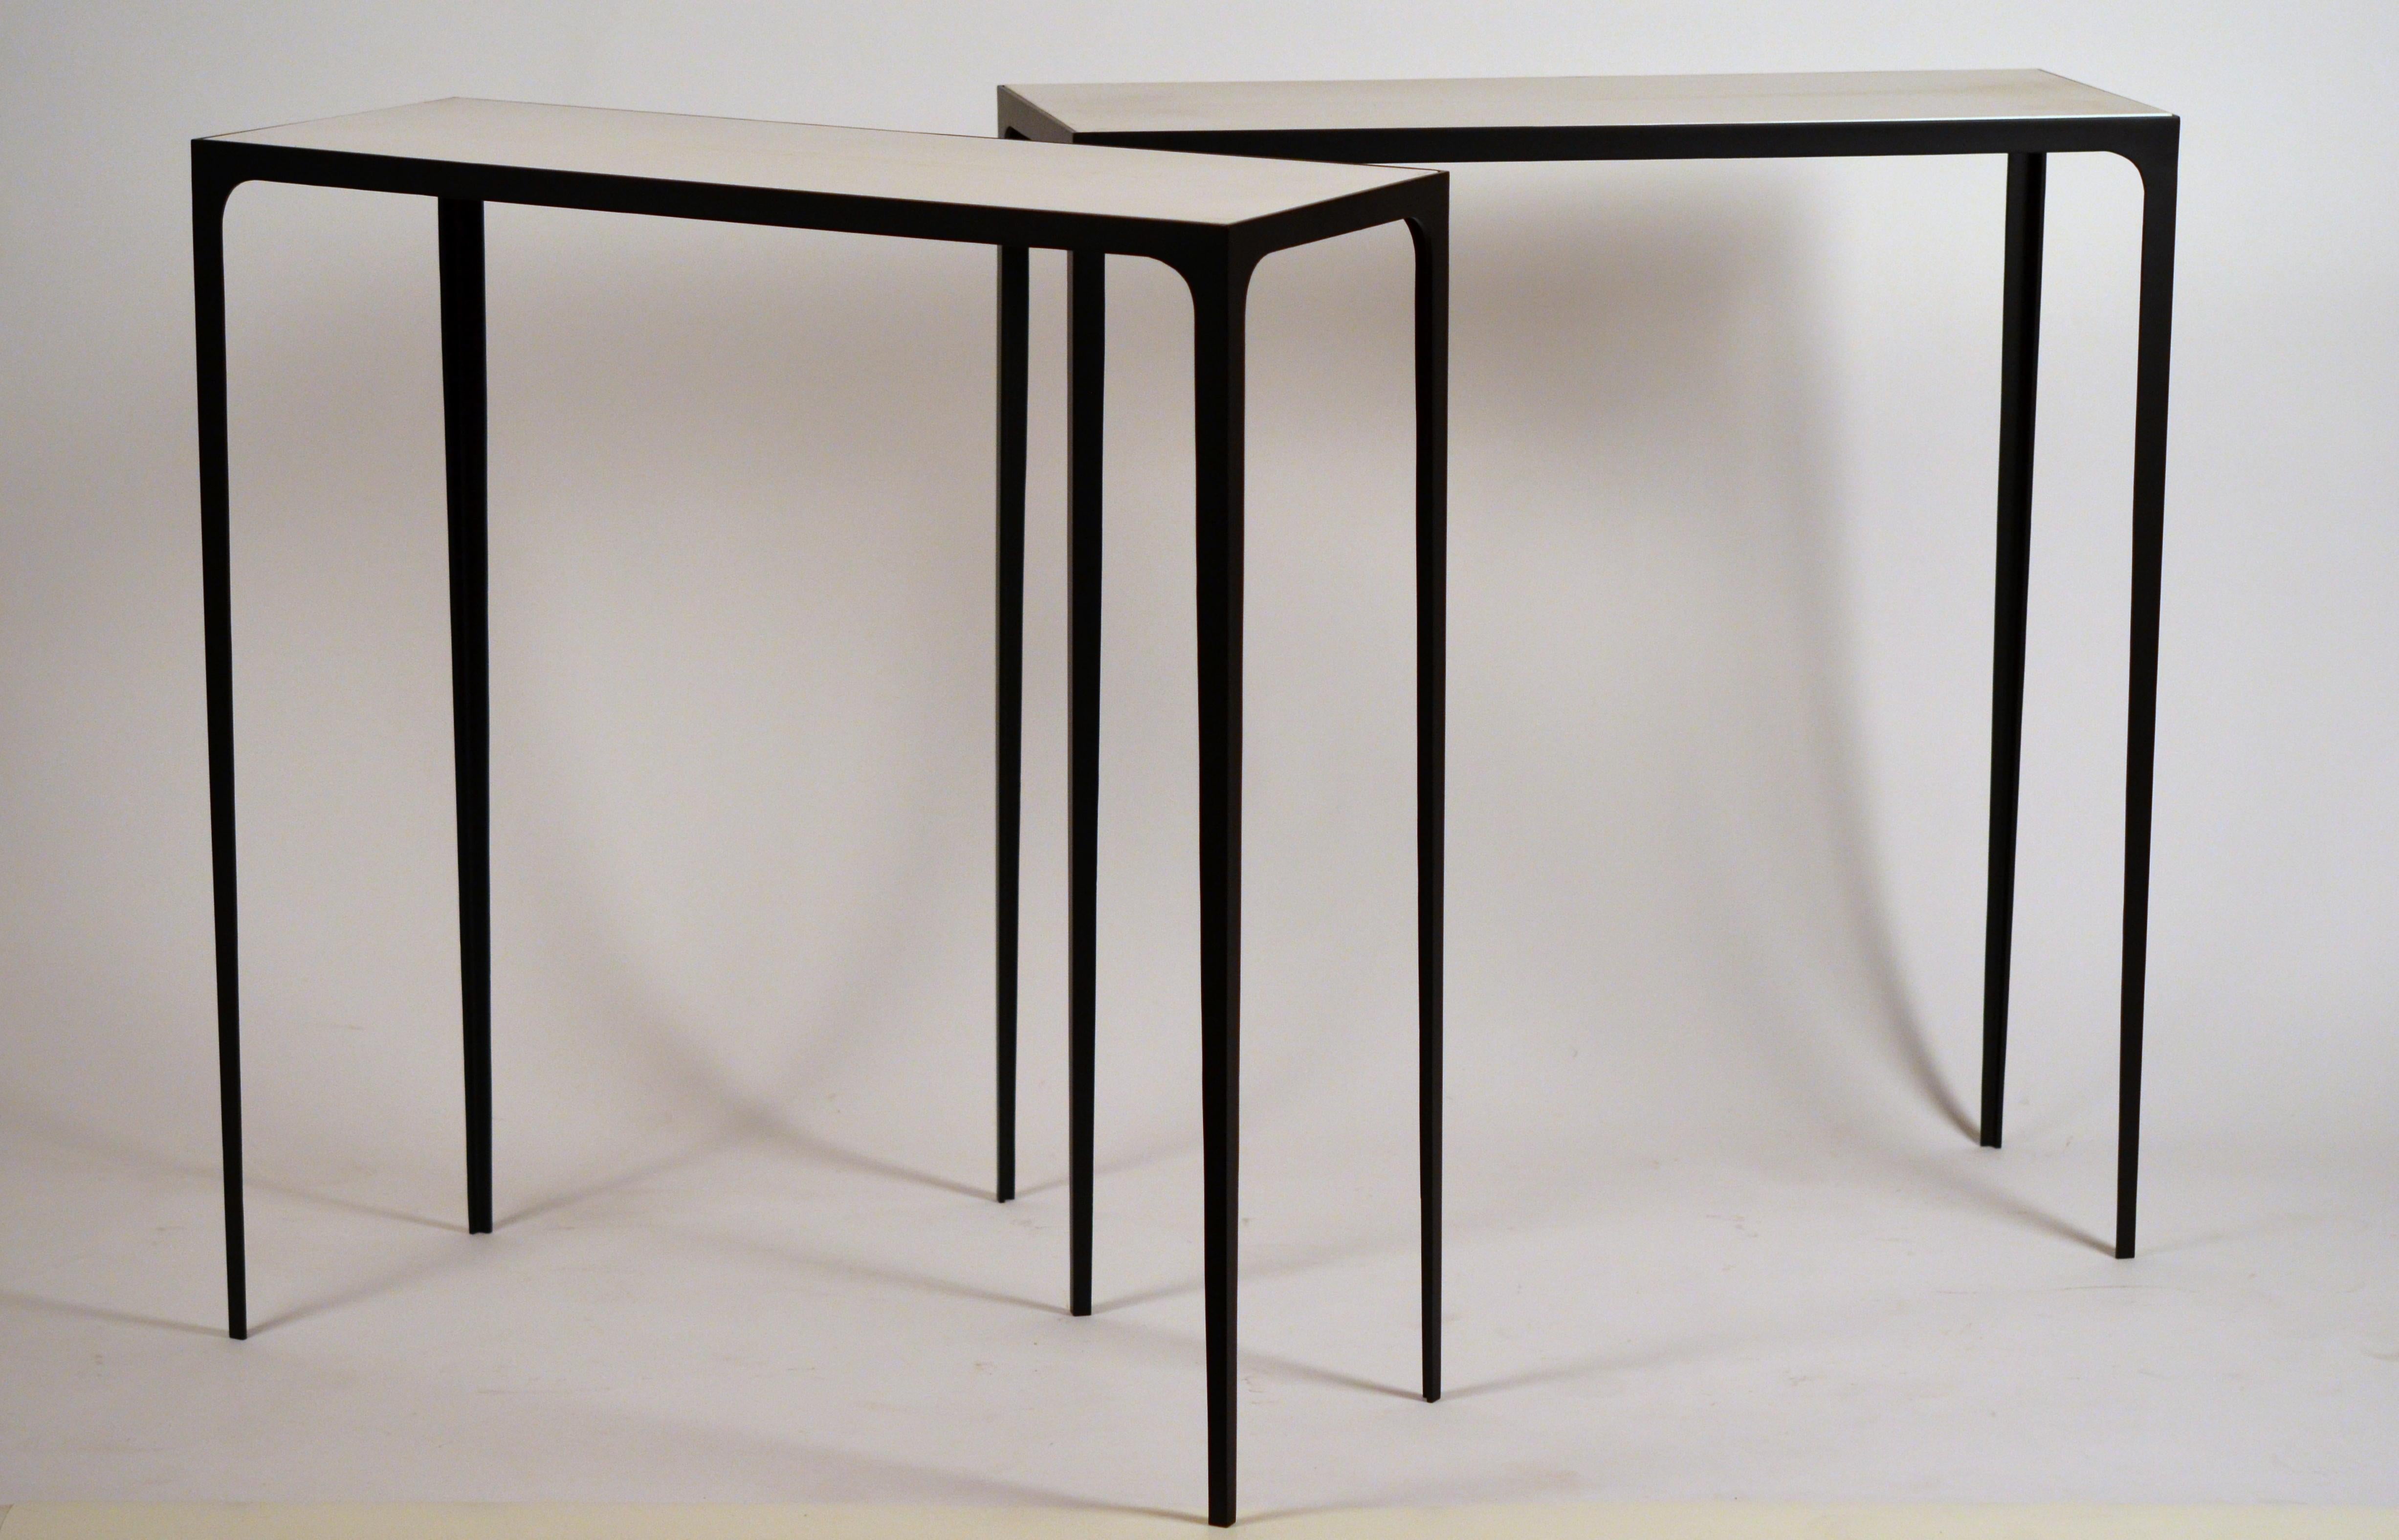 Pair of chic 'Esquisse' wrought iron and parchment consoles by Design Frères.

Contrasting white/cream goat parchment top over blackened slender steel base.

Beautifully simple, understated design.